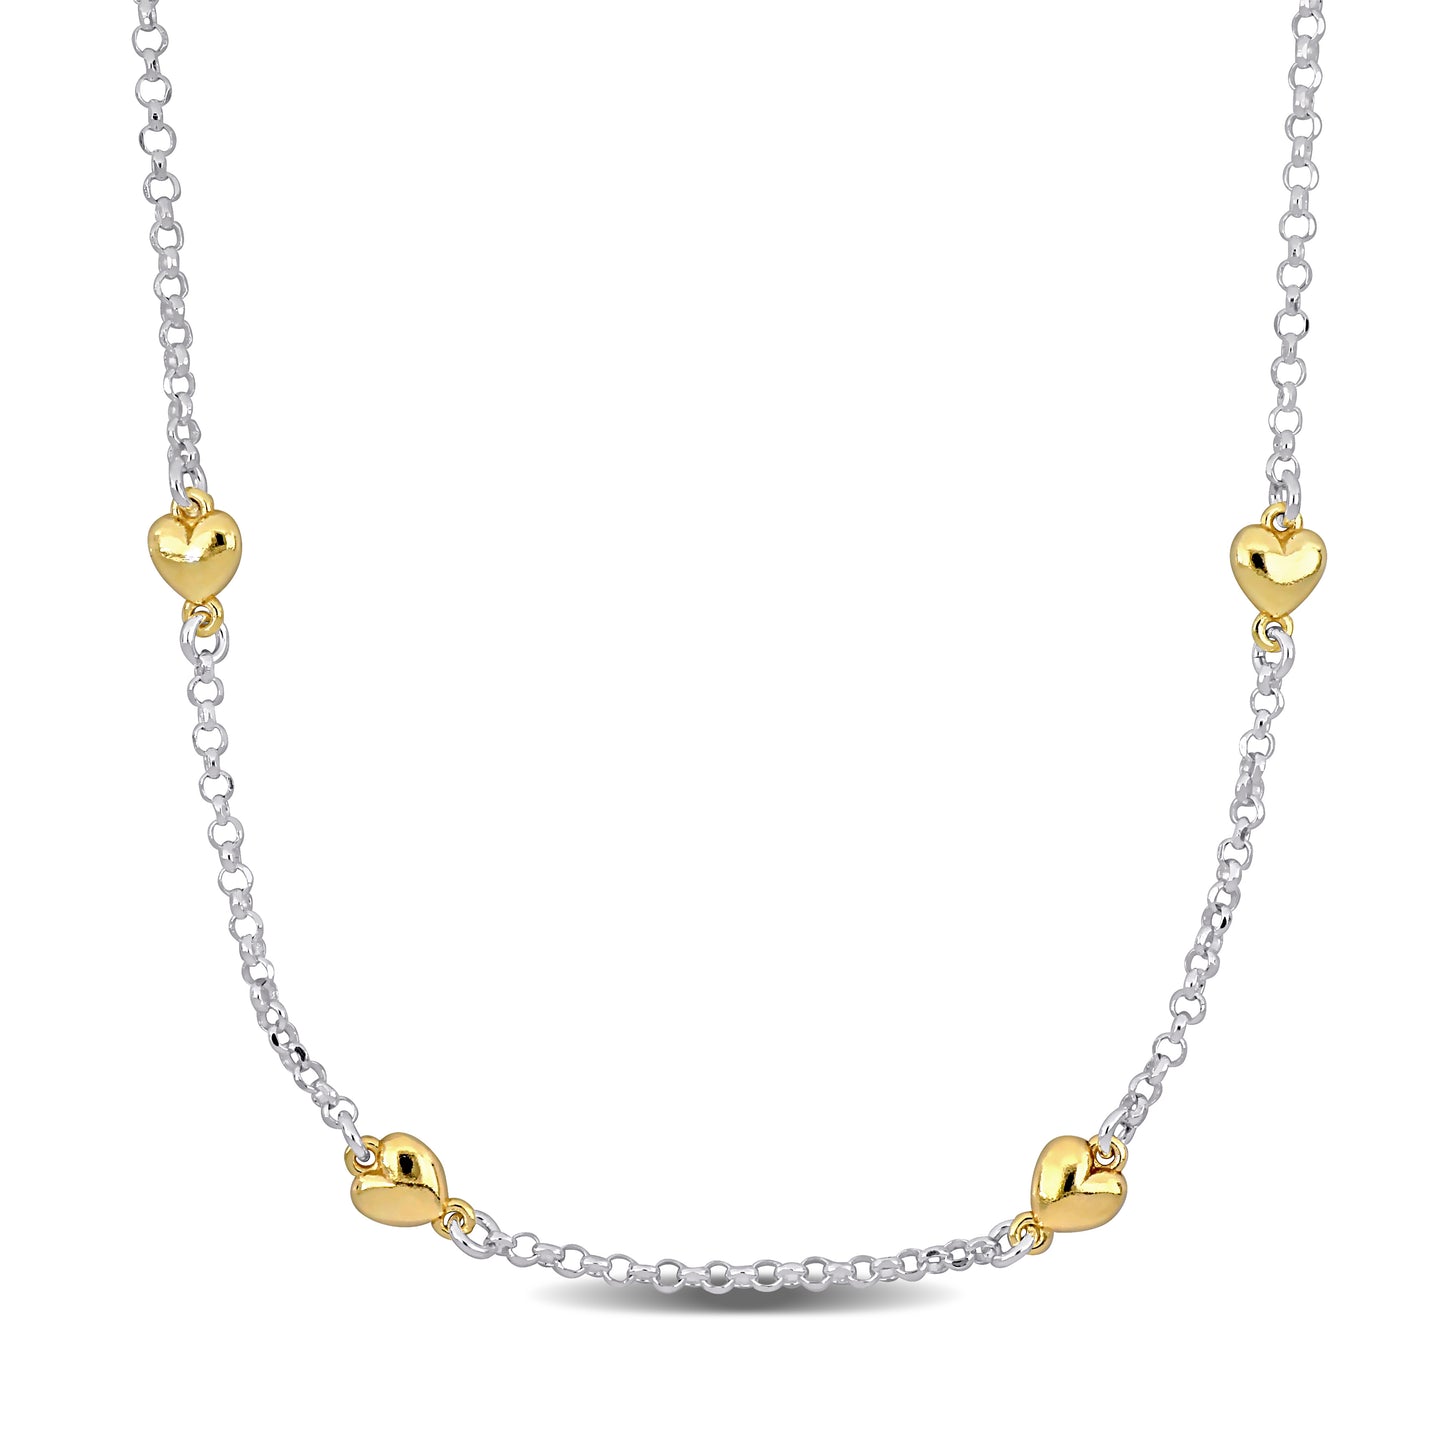 KIDS/TEENS Silver White and Yellow 4 Heart Charm station Necklace on diamond Cut Rolo Chain w/lobster Clasp Length (inches): 16.5+1 ext.